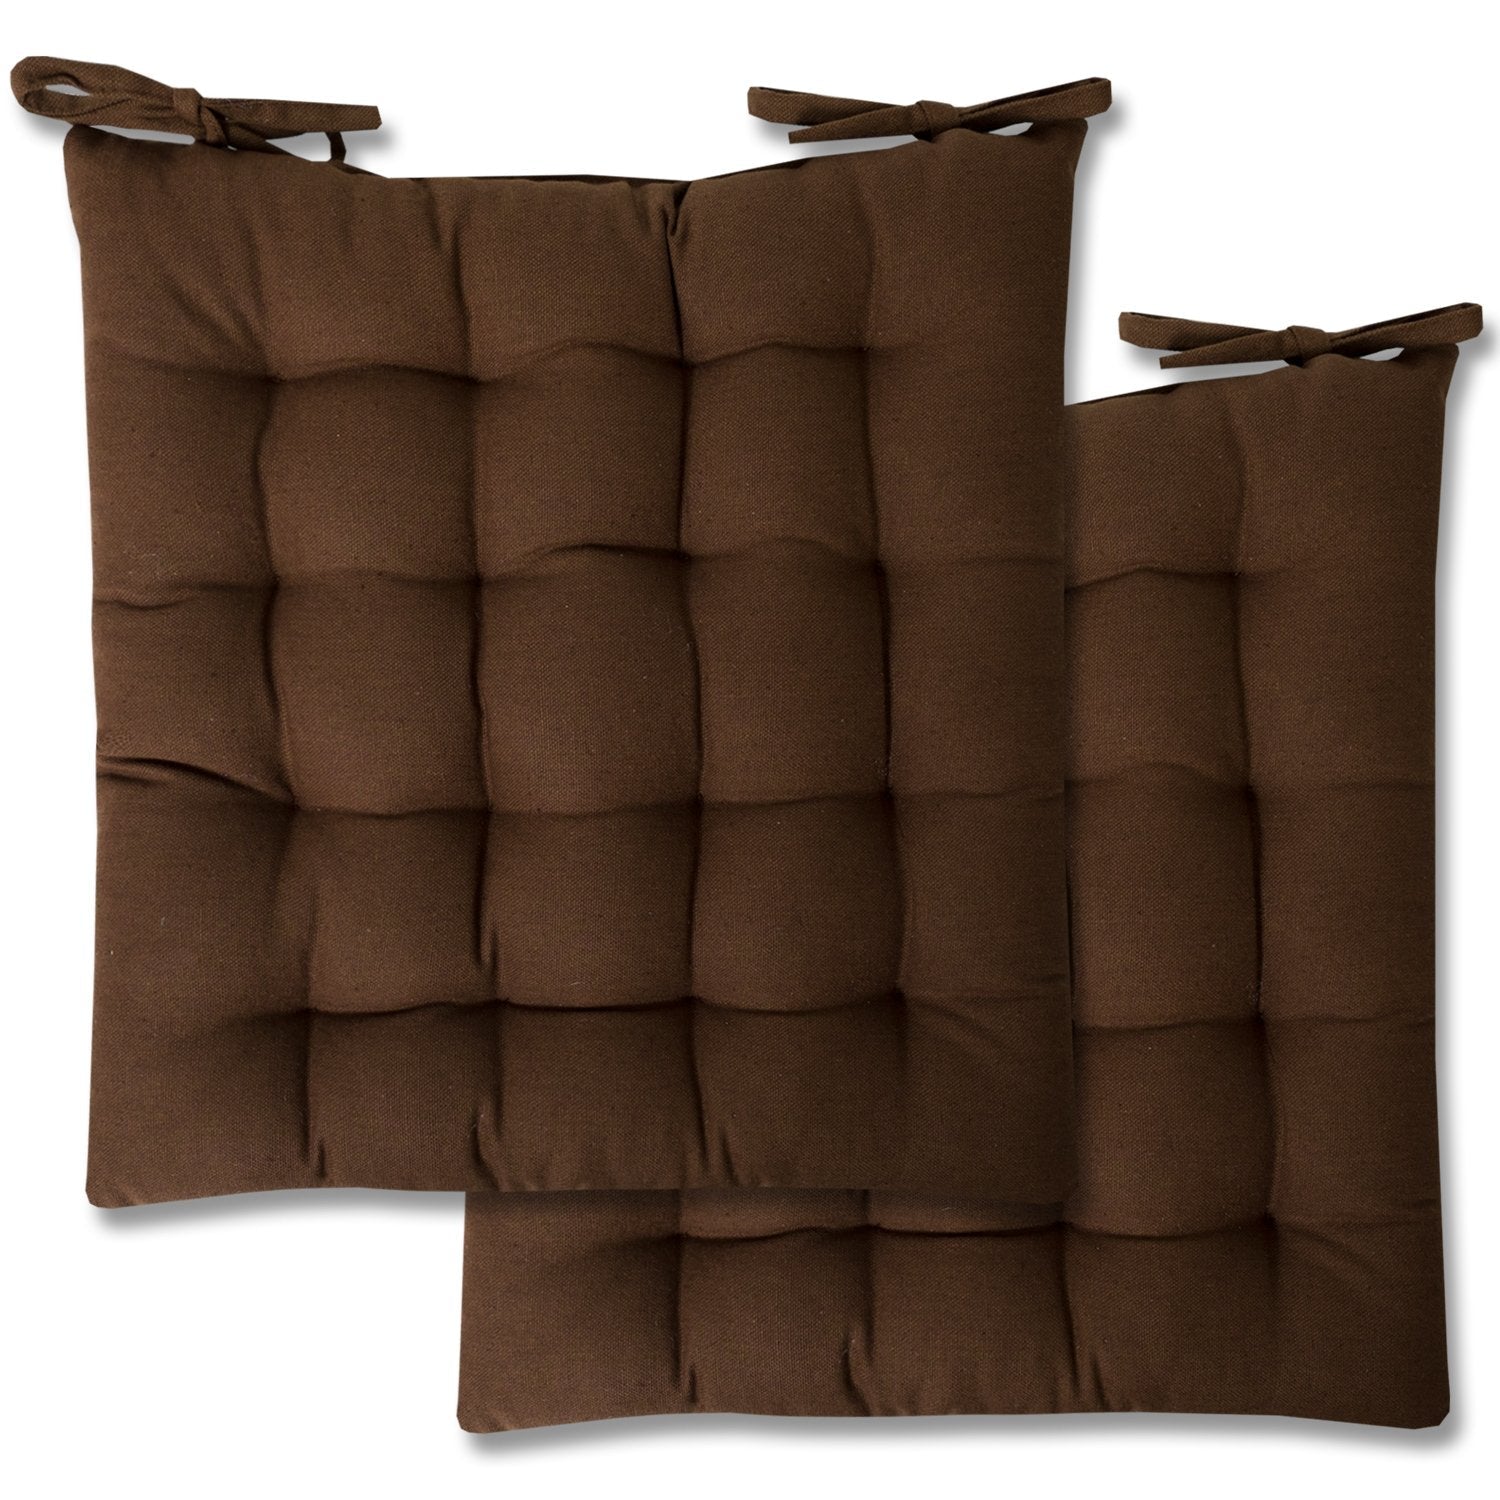 Tufted Chair Cushion Set 16 By 16 Chocolate 2-Pack